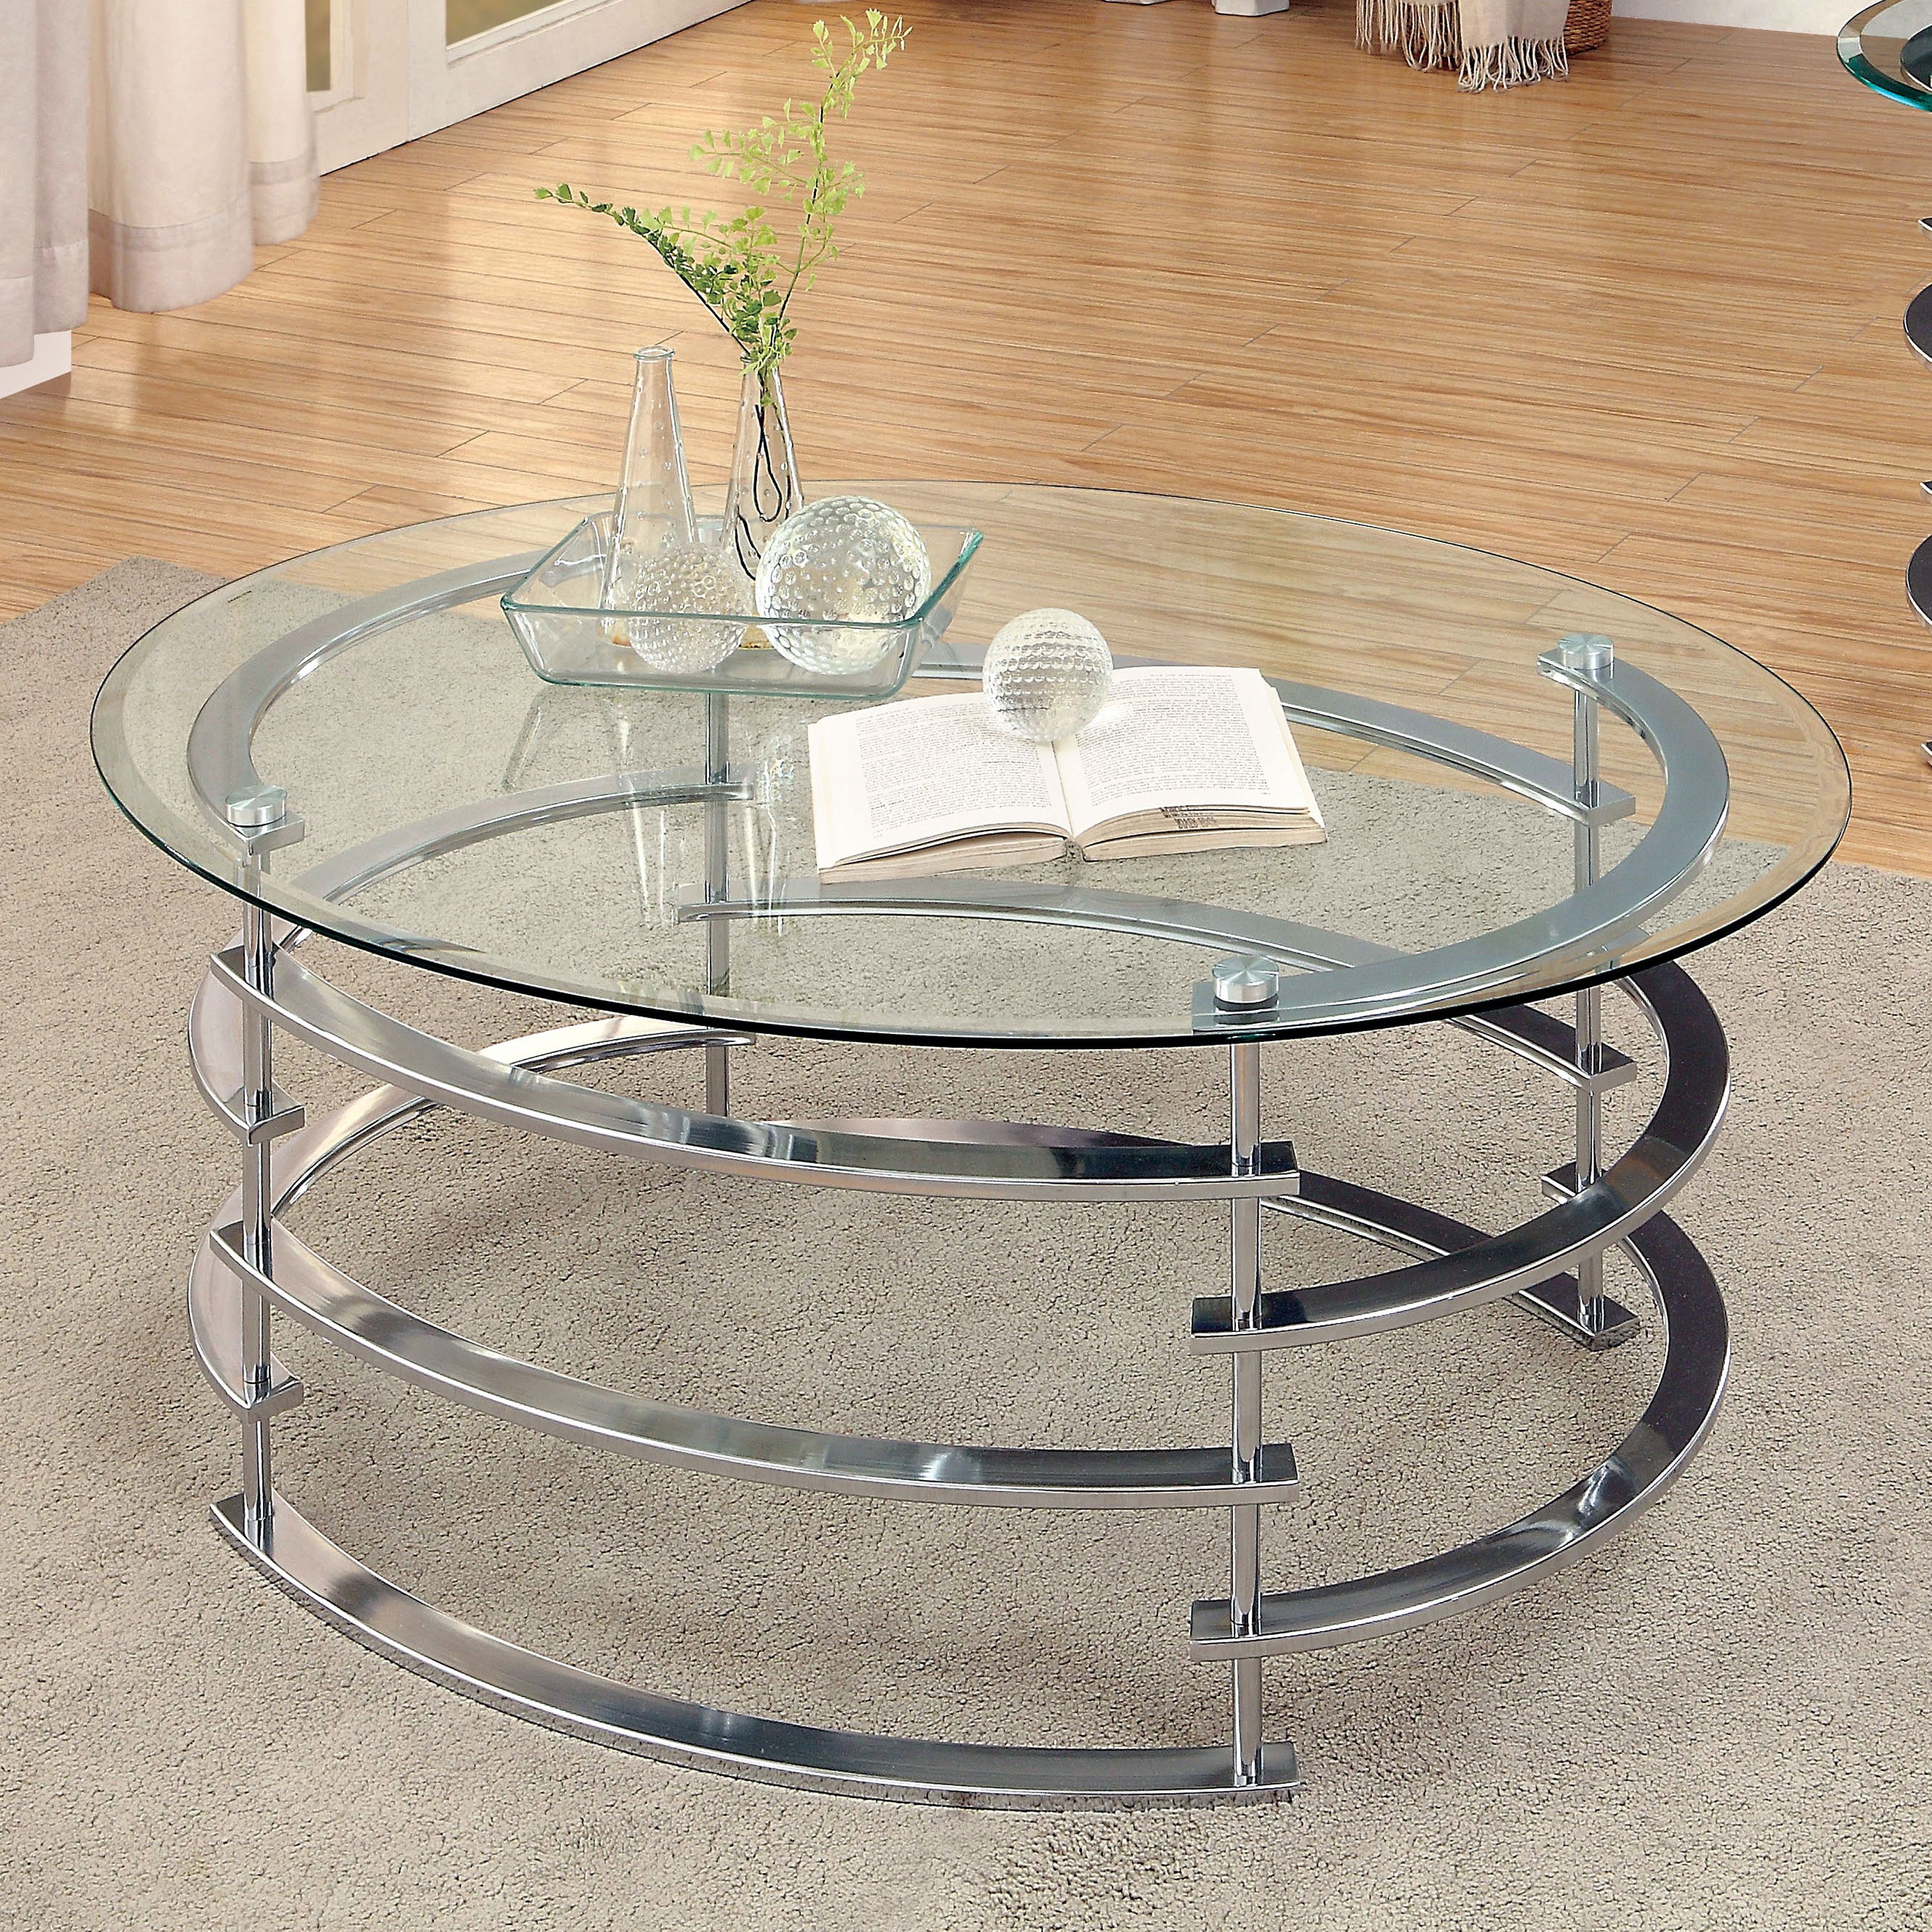 Fashionable Silver Orchid Ipsen Contemporary Glass Top Coffee Tables With Regard To Silver Orchid Marcello Contemporary Glass Top Coffee Table (View 18 of 20)